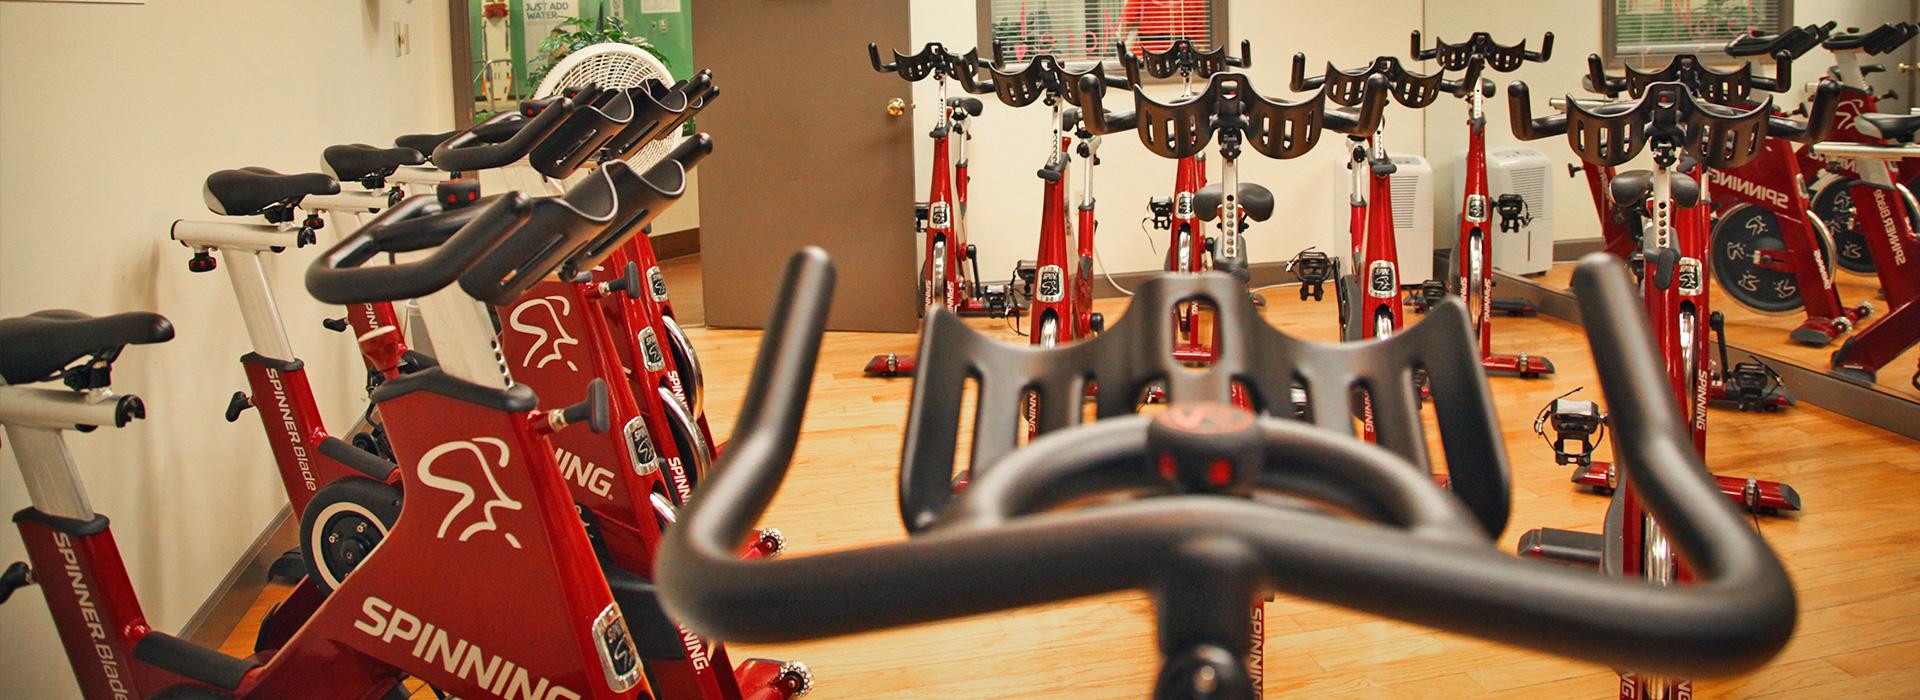 Indian River Family YMCA cycling room